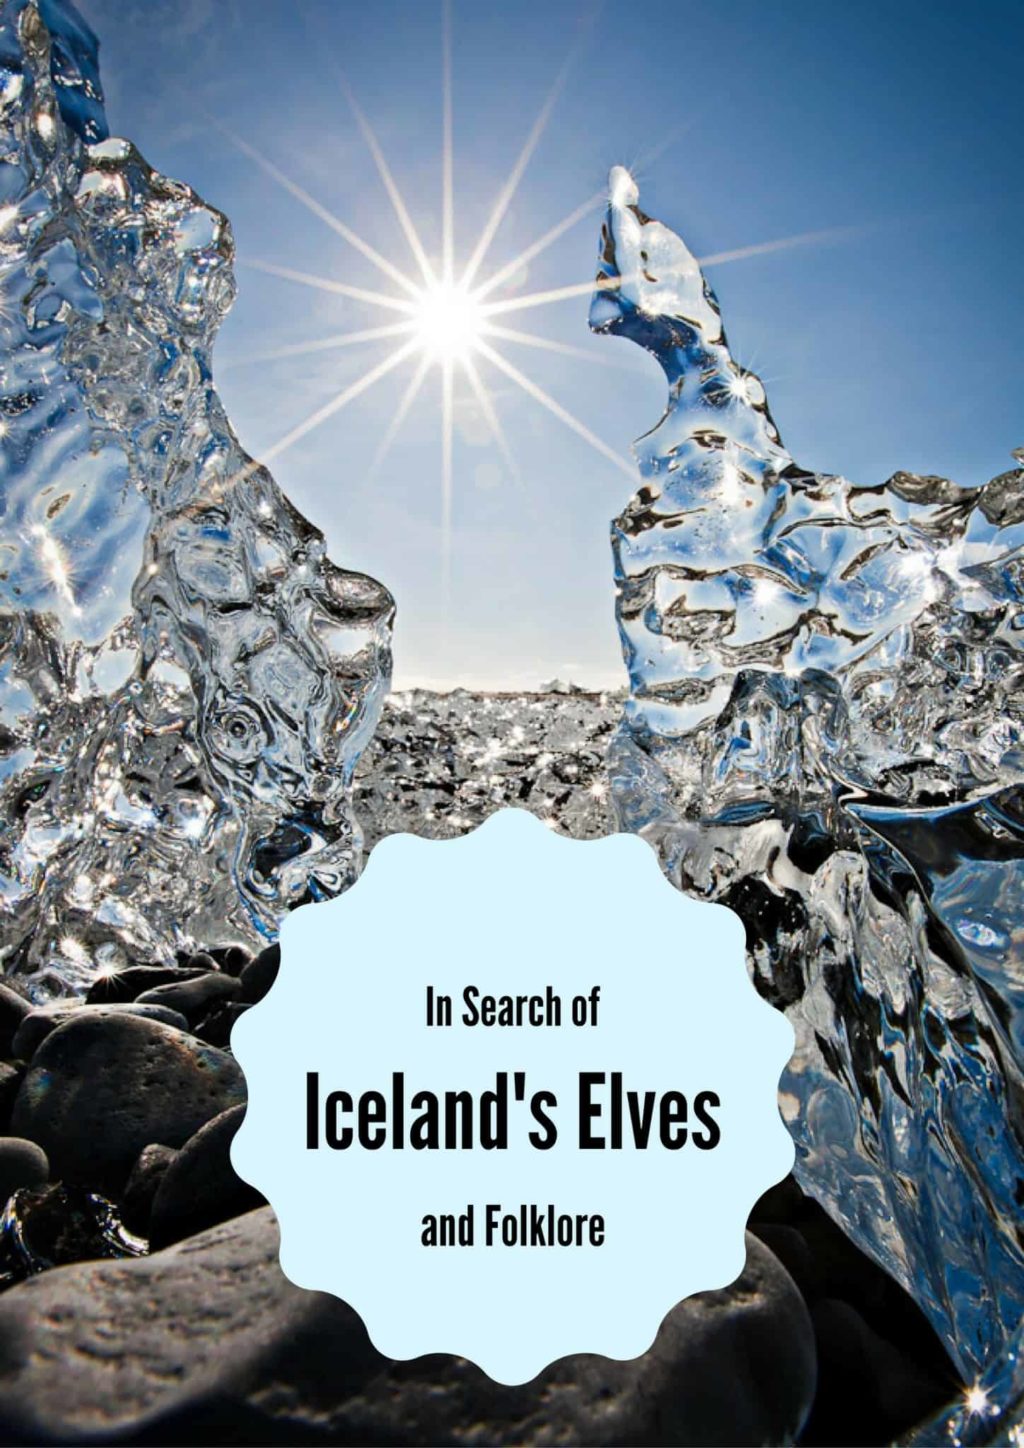 Iceland's elves and folklore